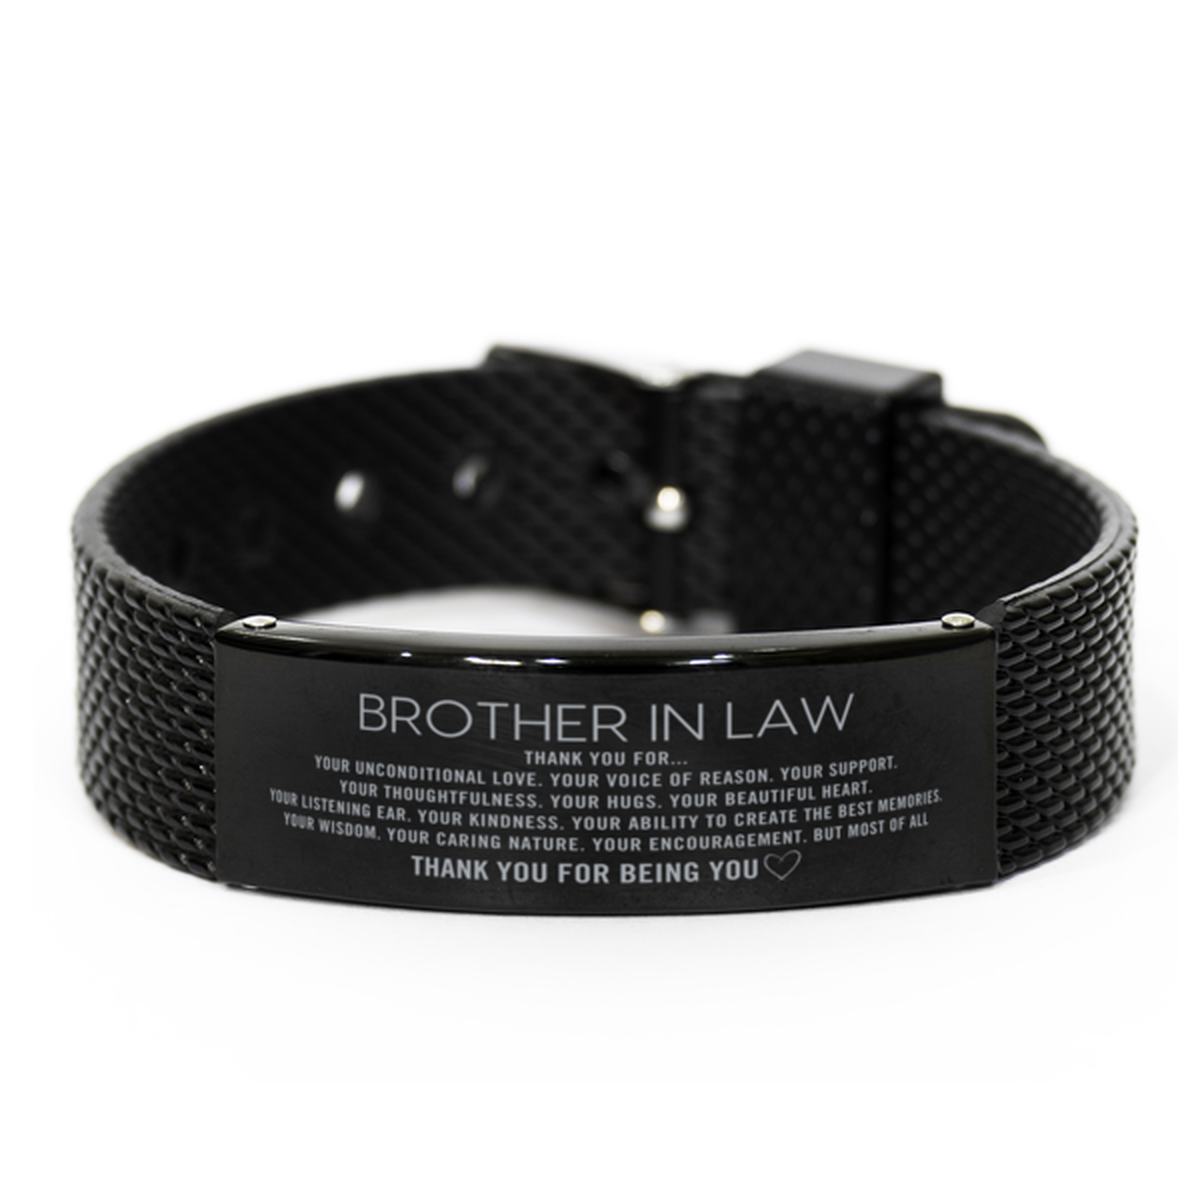 Brother In Law Black Shark Mesh Bracelet Custom, Engraved Gifts For Brother In Law Christmas Graduation Birthday Gifts for Men Women Brother In Law Thank you for Your unconditional love